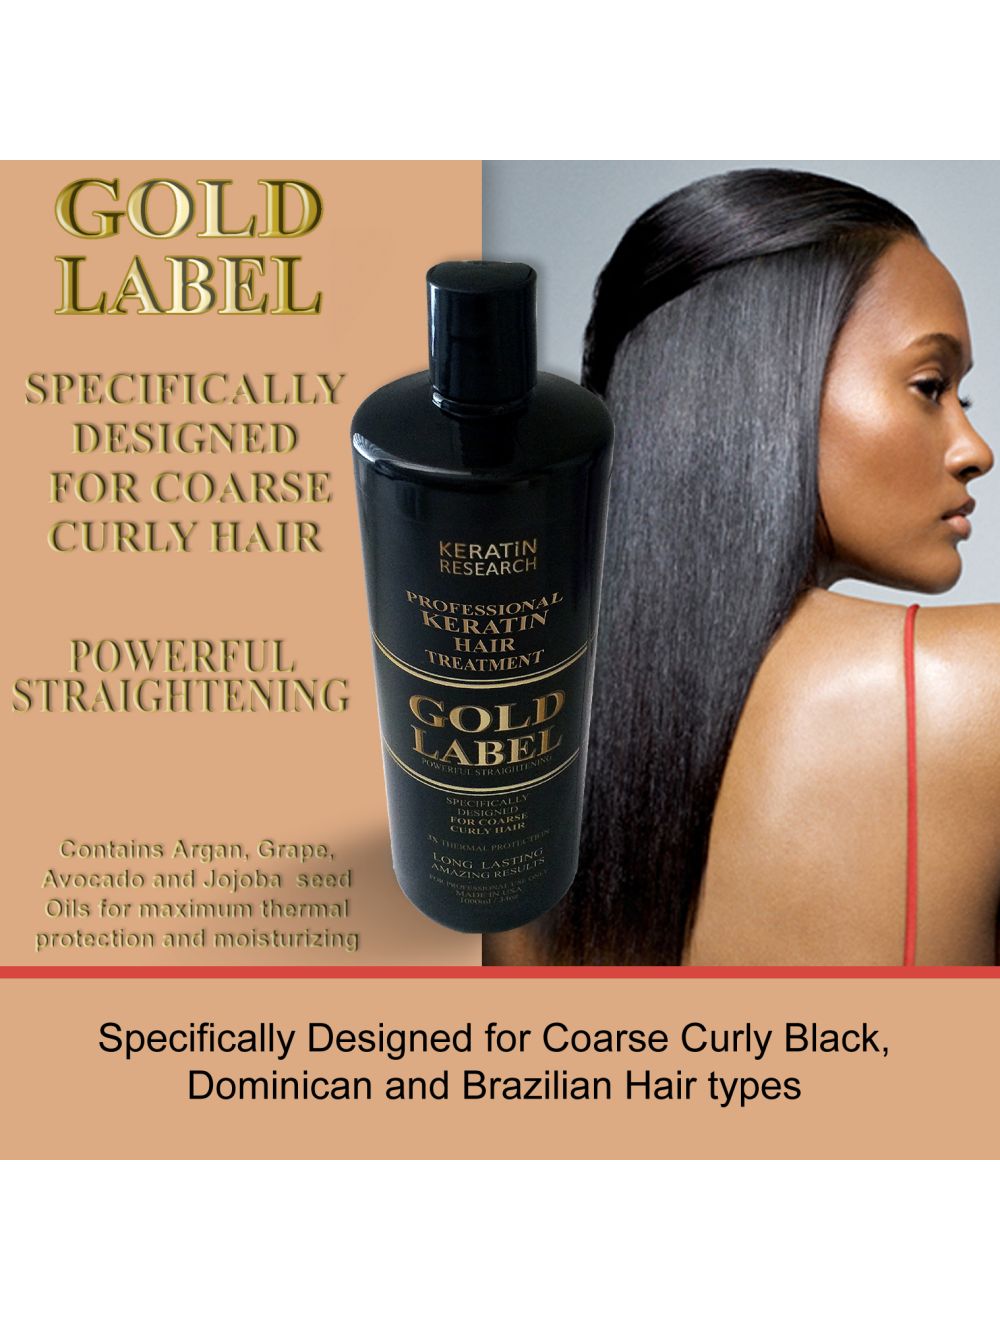 Gold Label Professional Keratin Treatment Super Enhanced Formula  Specifically Designed for Coarse Curly Black, Dominican and Brazilian Hair  types